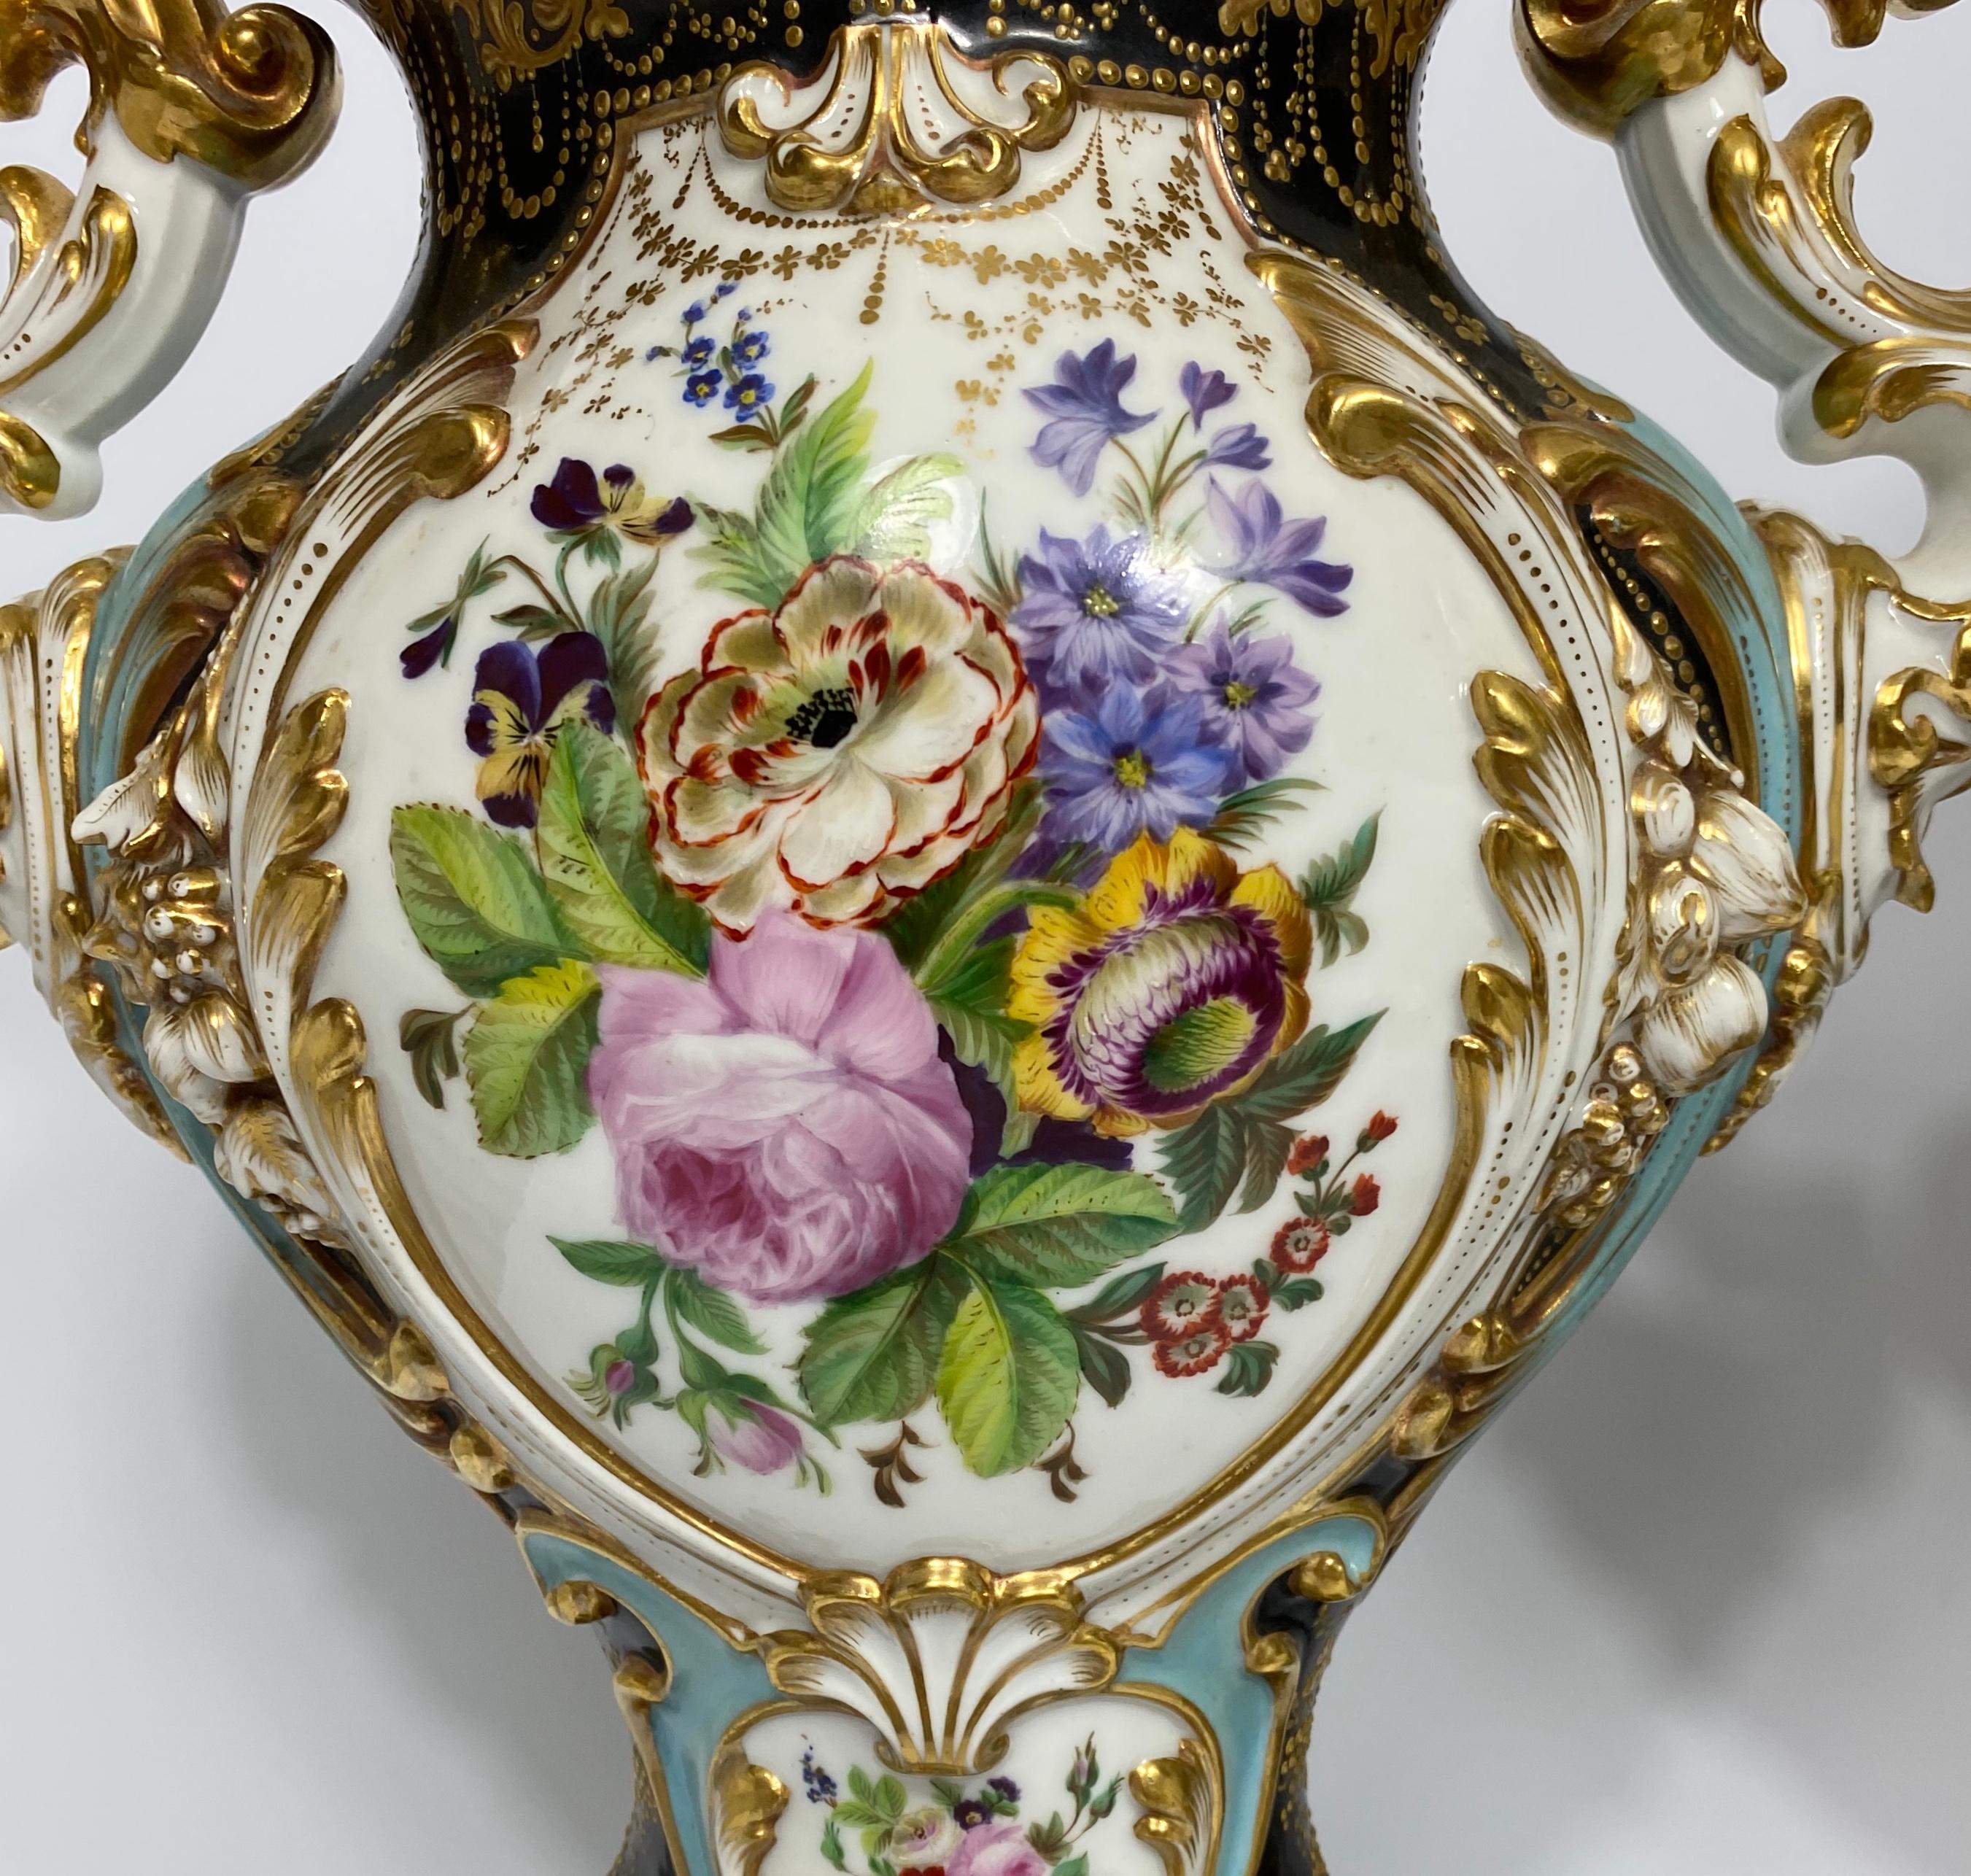 Mid-19th Century Pair of French Porcelain Vases, Probably Jacob Petit, circa 1840